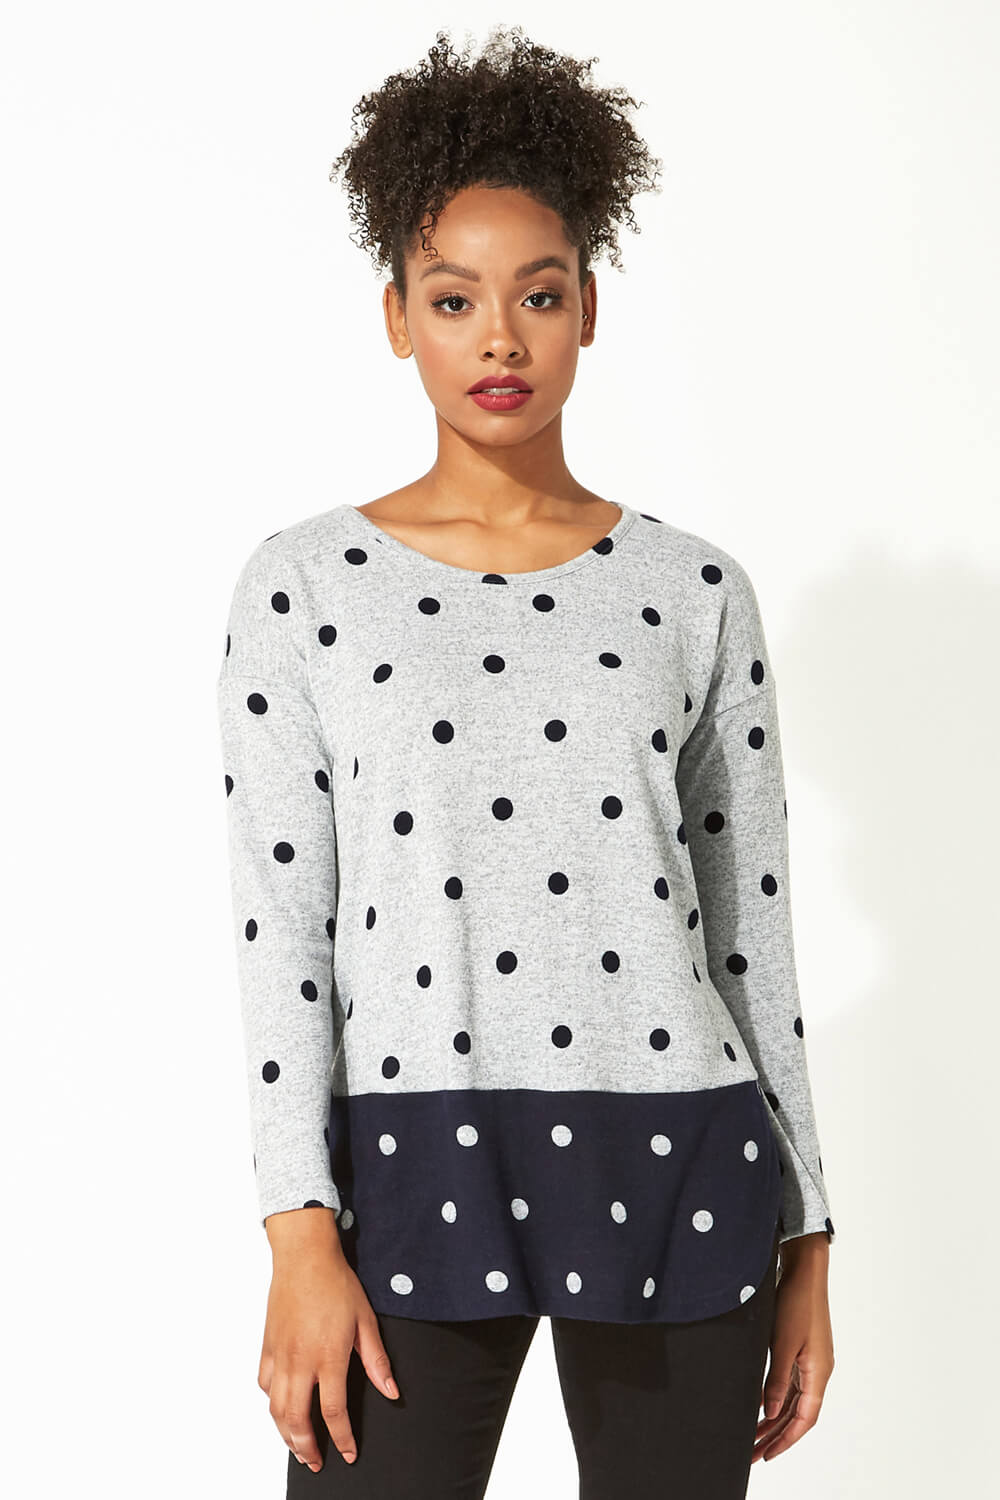 Contrast Polka Dot Round Neck Long Sleeve Top